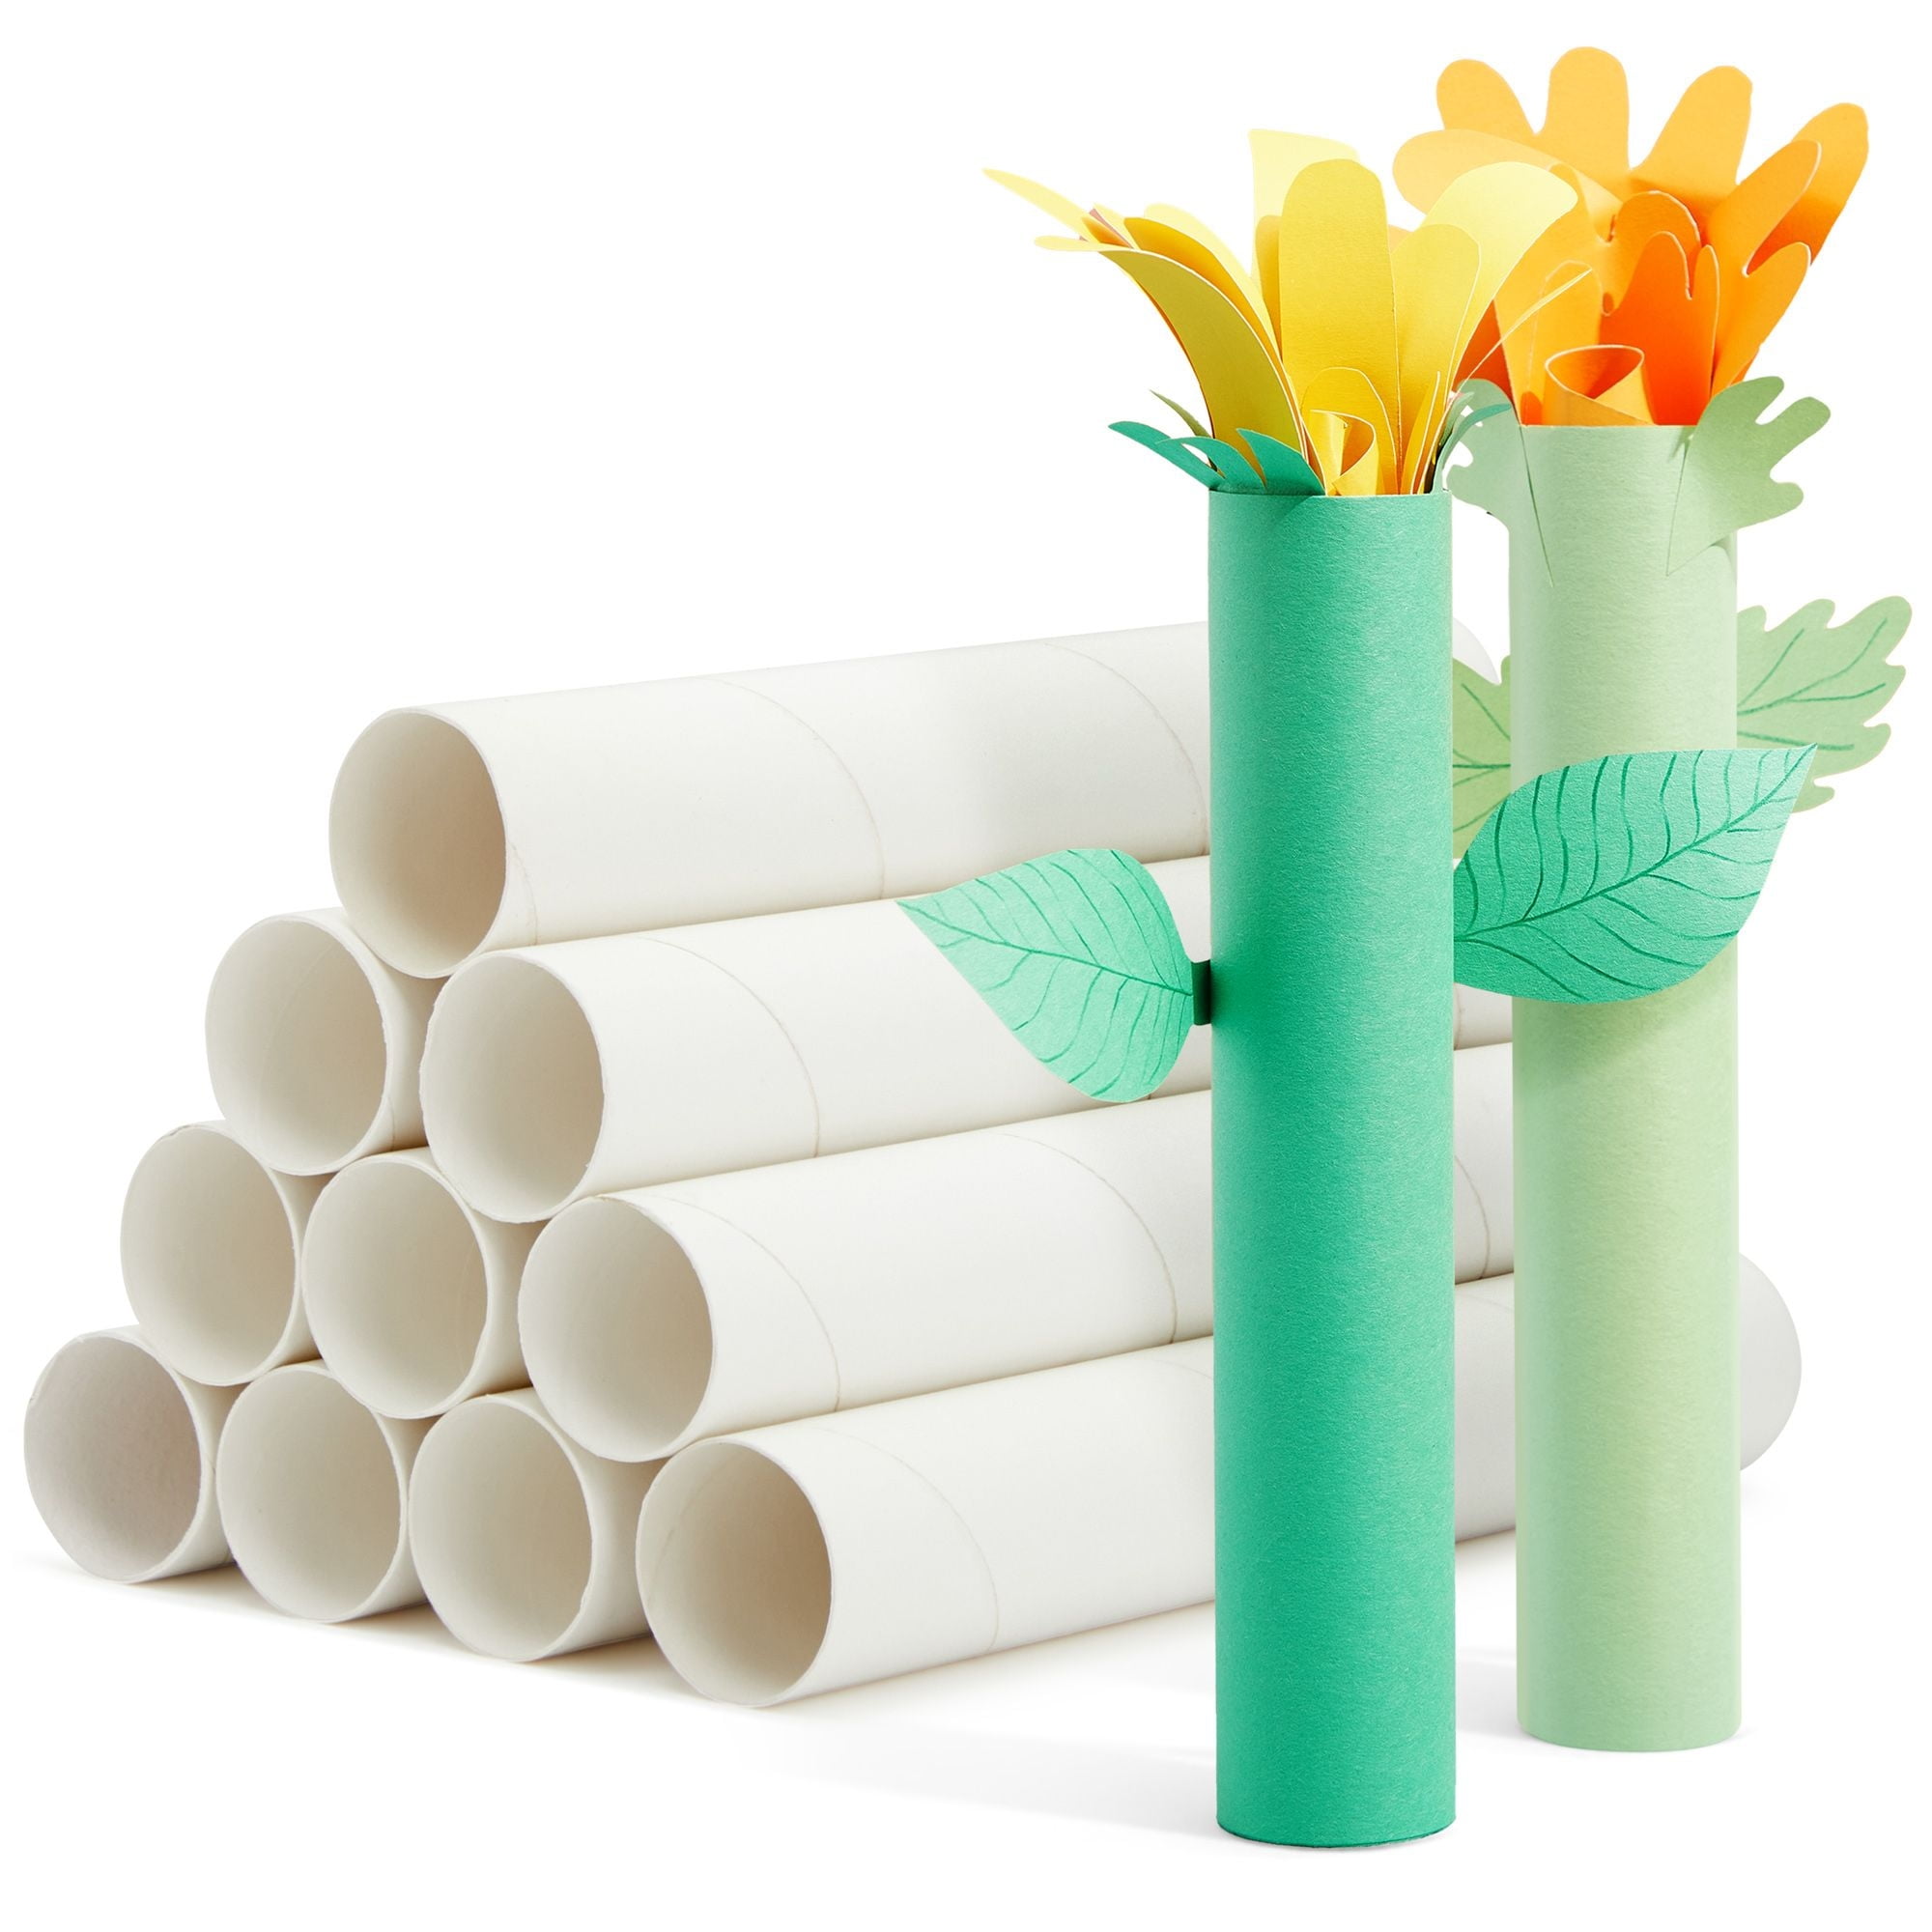 50 Brown Empty Paper Towel Rolls, 2 Size Cardboard Tubes for Crafts, DIY  Art Projects (6 and 7.5 in)